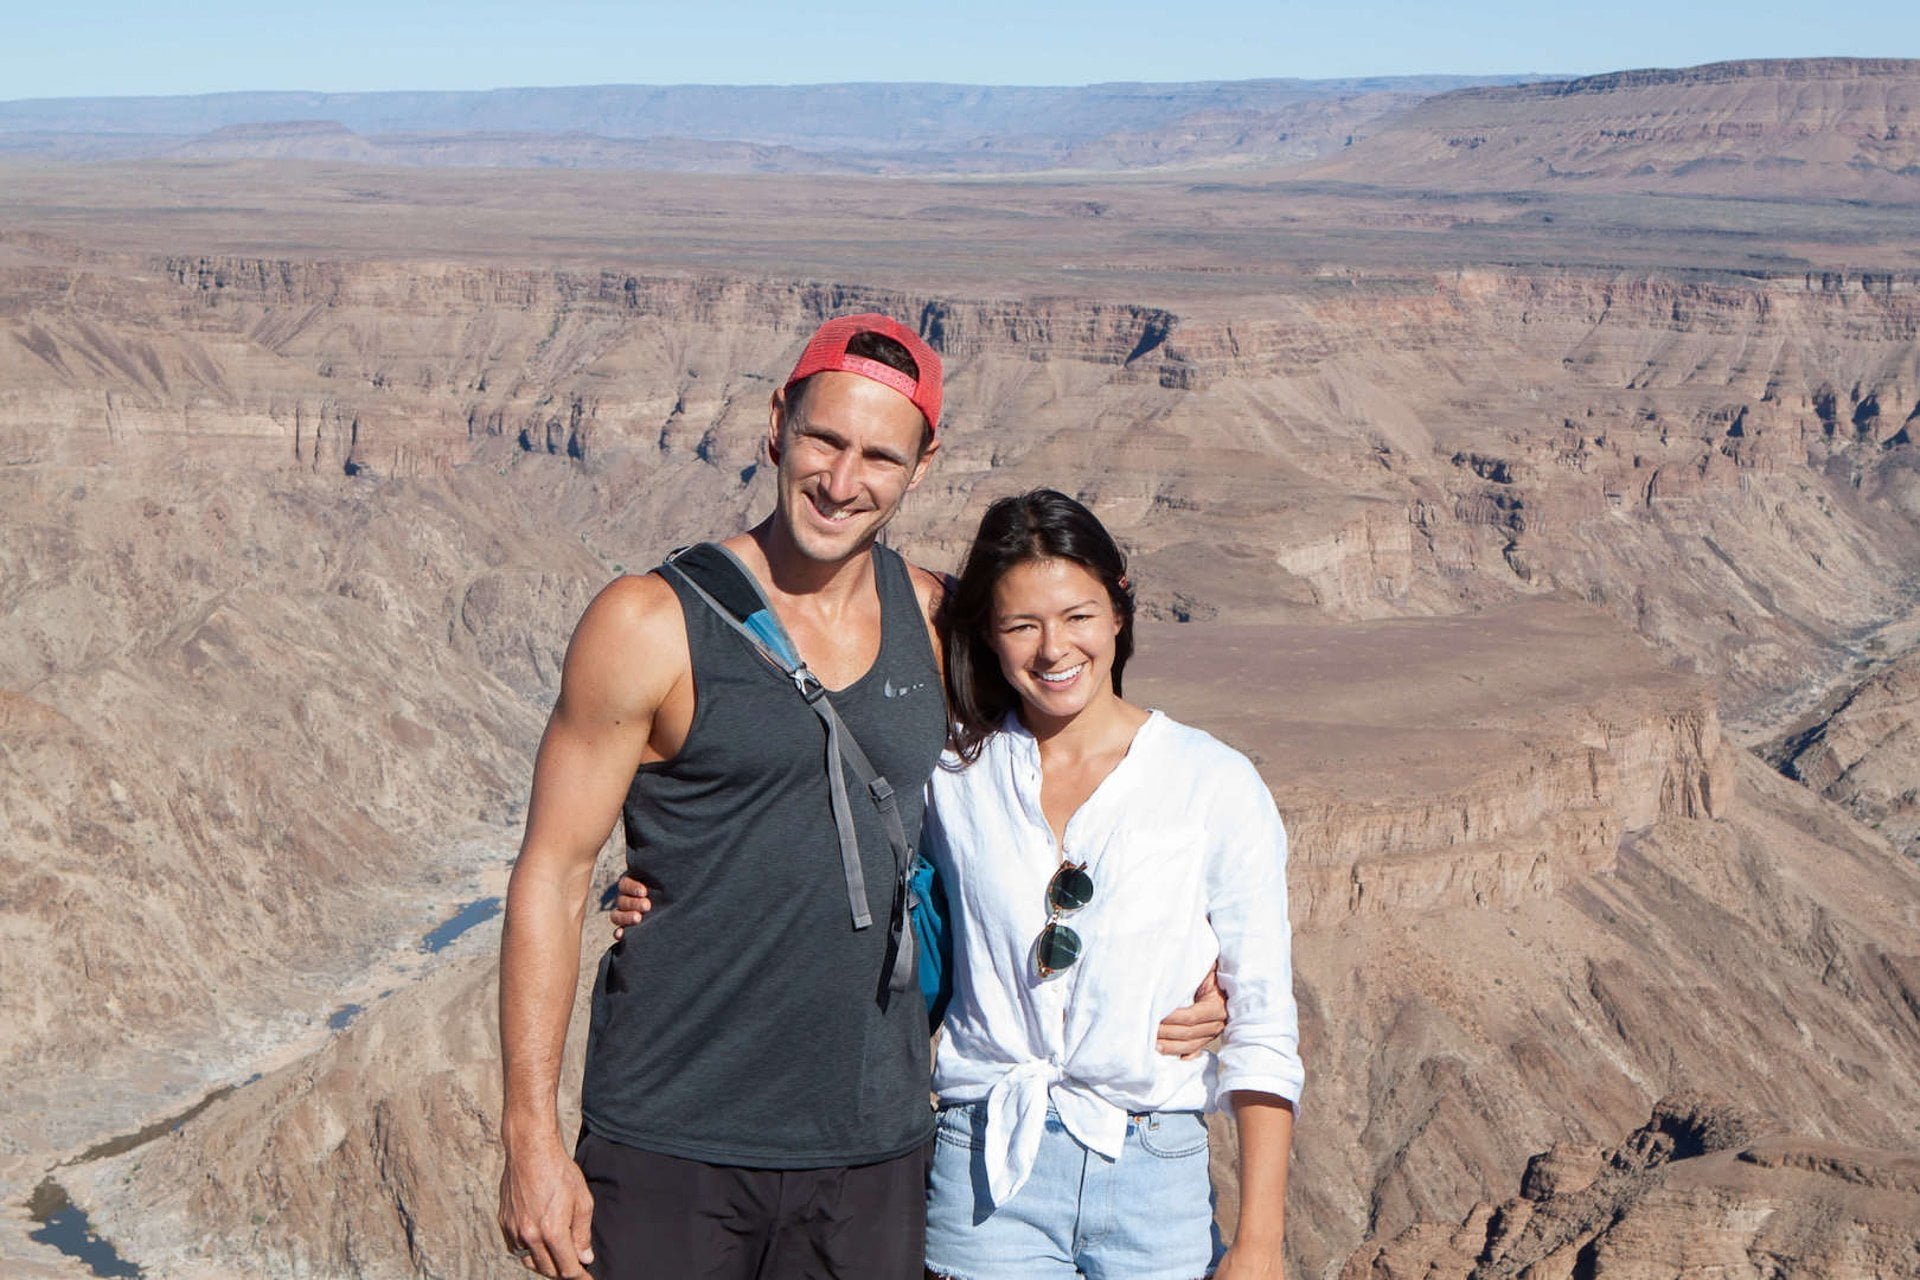 Chris and Kim with views of Fish River Canyon in Namibia, in the background.